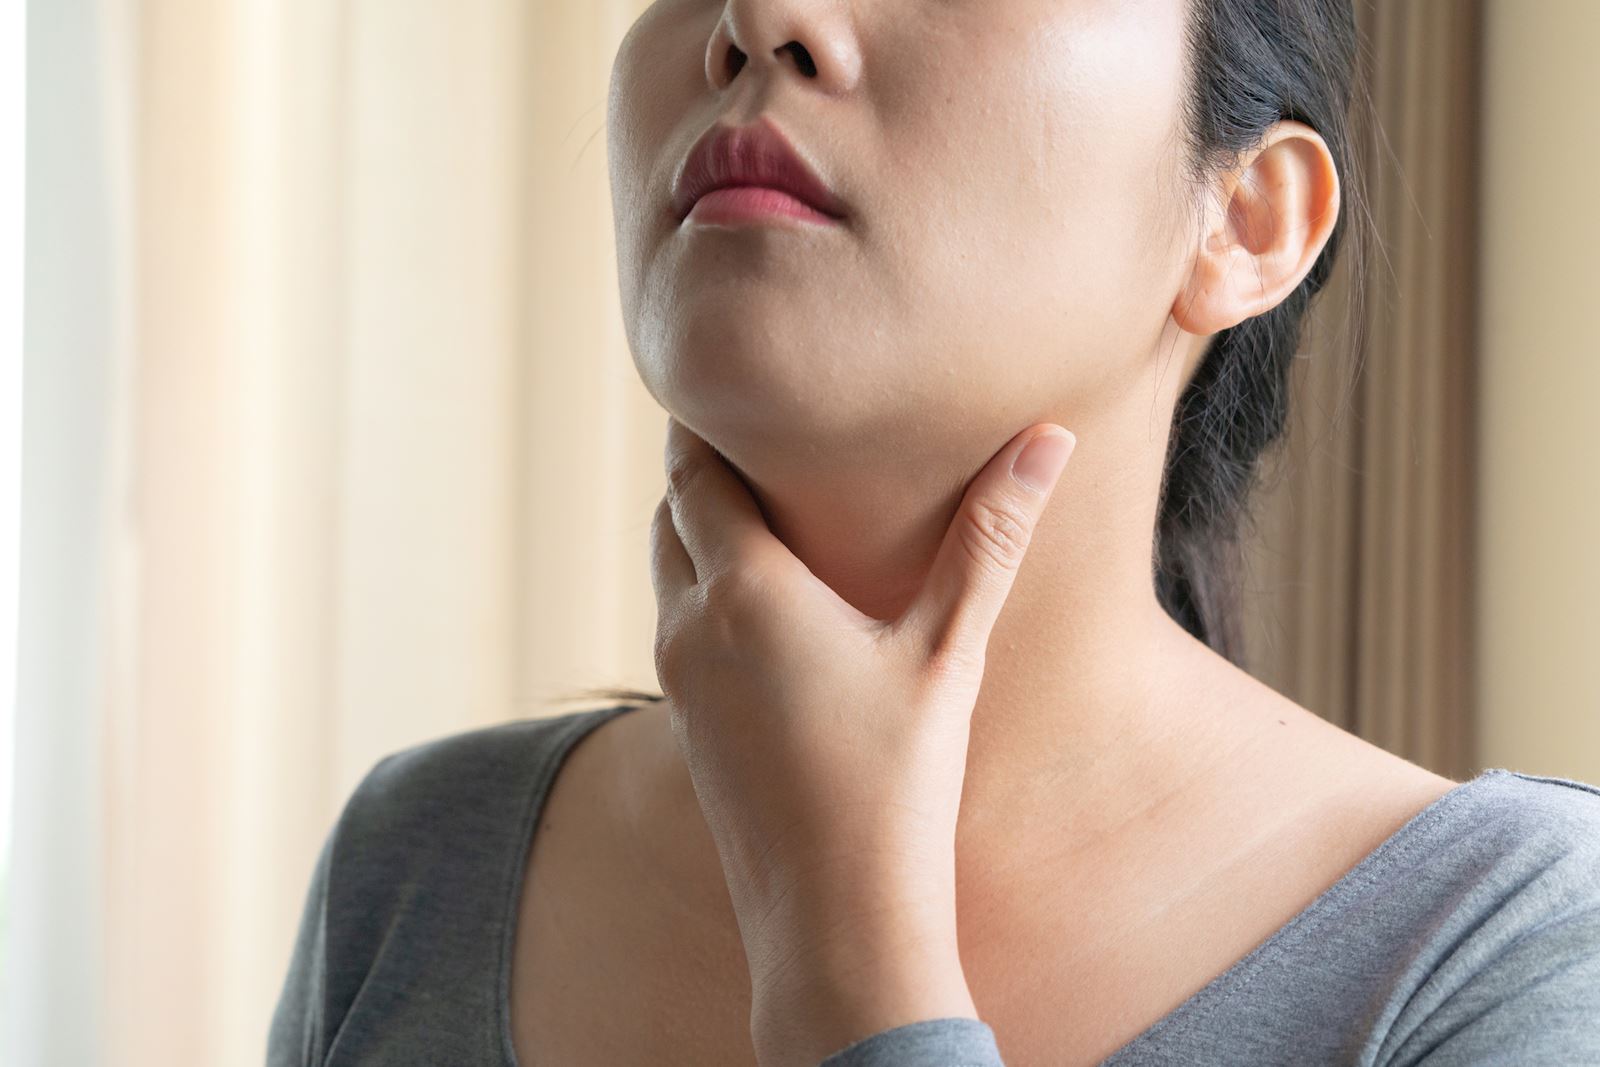 Skin Concern] My mom always tells me that my neck is dirty and that I have  “maps” on my neck. I wash my neck everytime I wash my face, what is she